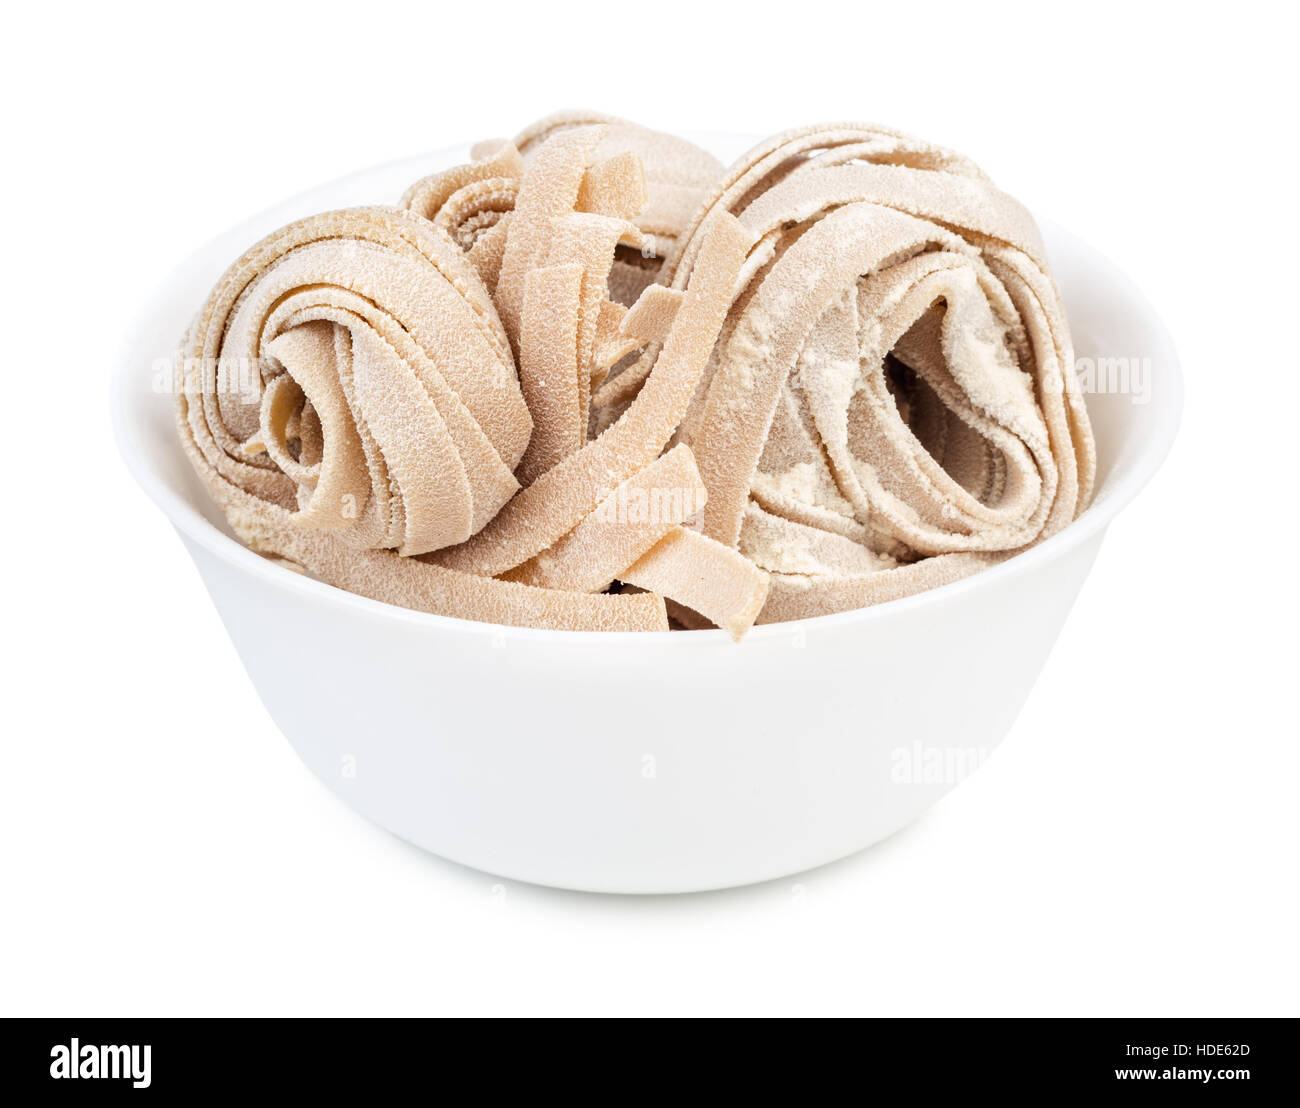 Dry homemade rolled traditional italian pasta  in bowl isolated on white background. Raw fettuccine or tagliatelle or pappardelle. Stock Photo